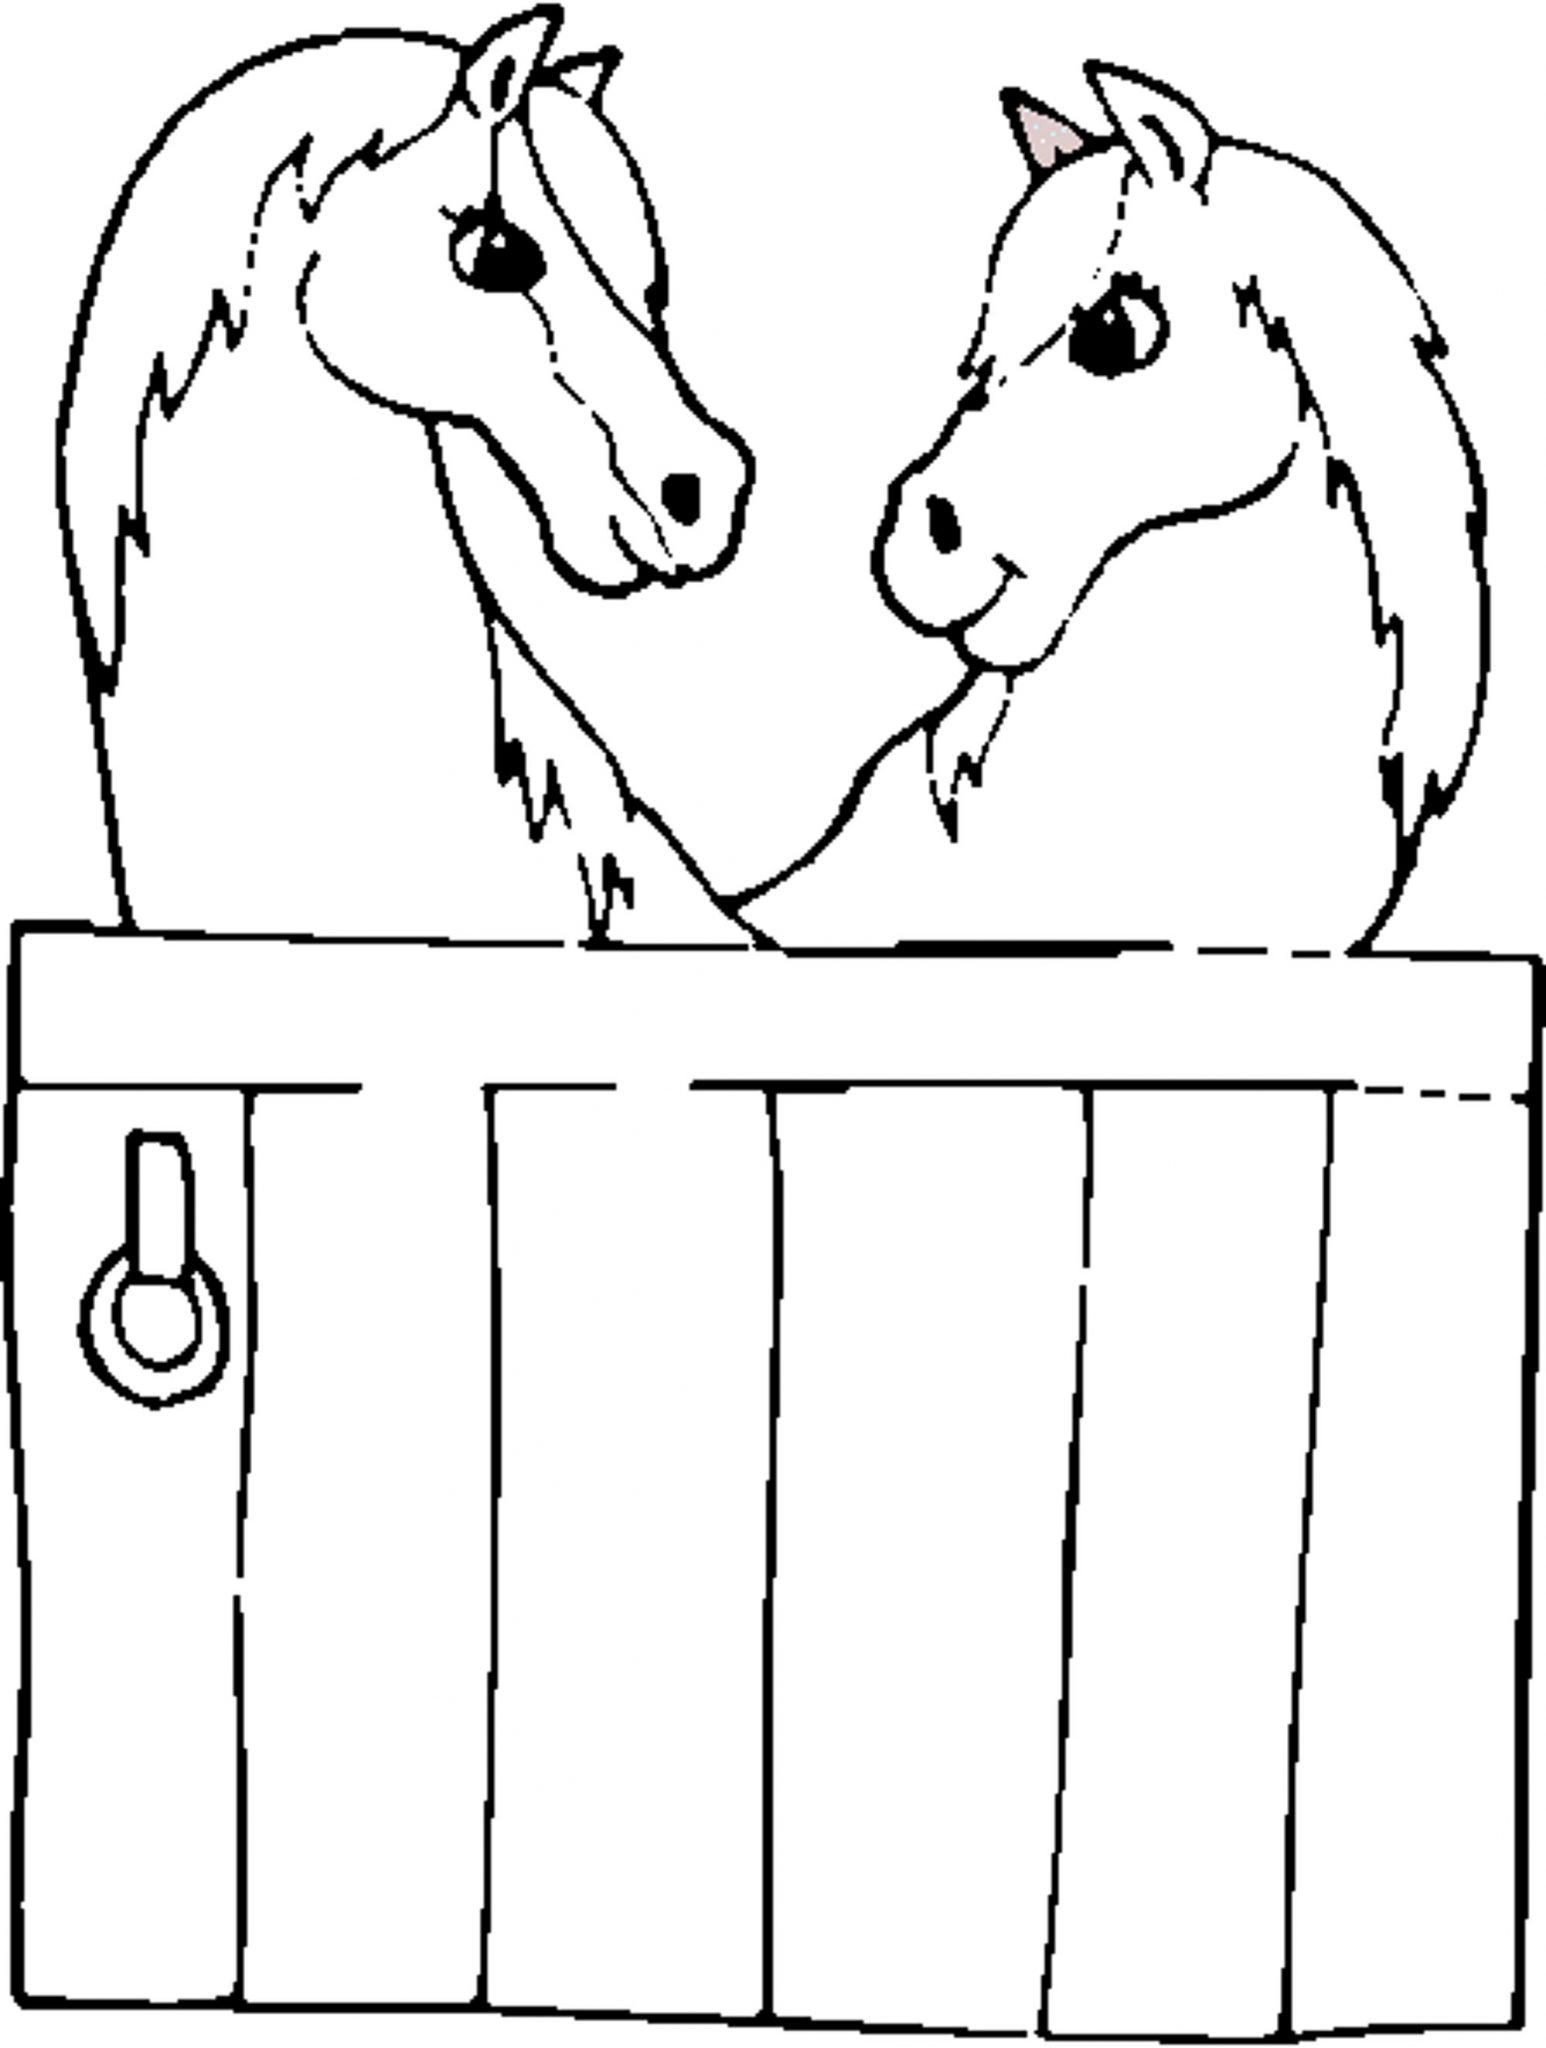 fun-horse-coloring-pages-for-your-kids-printable